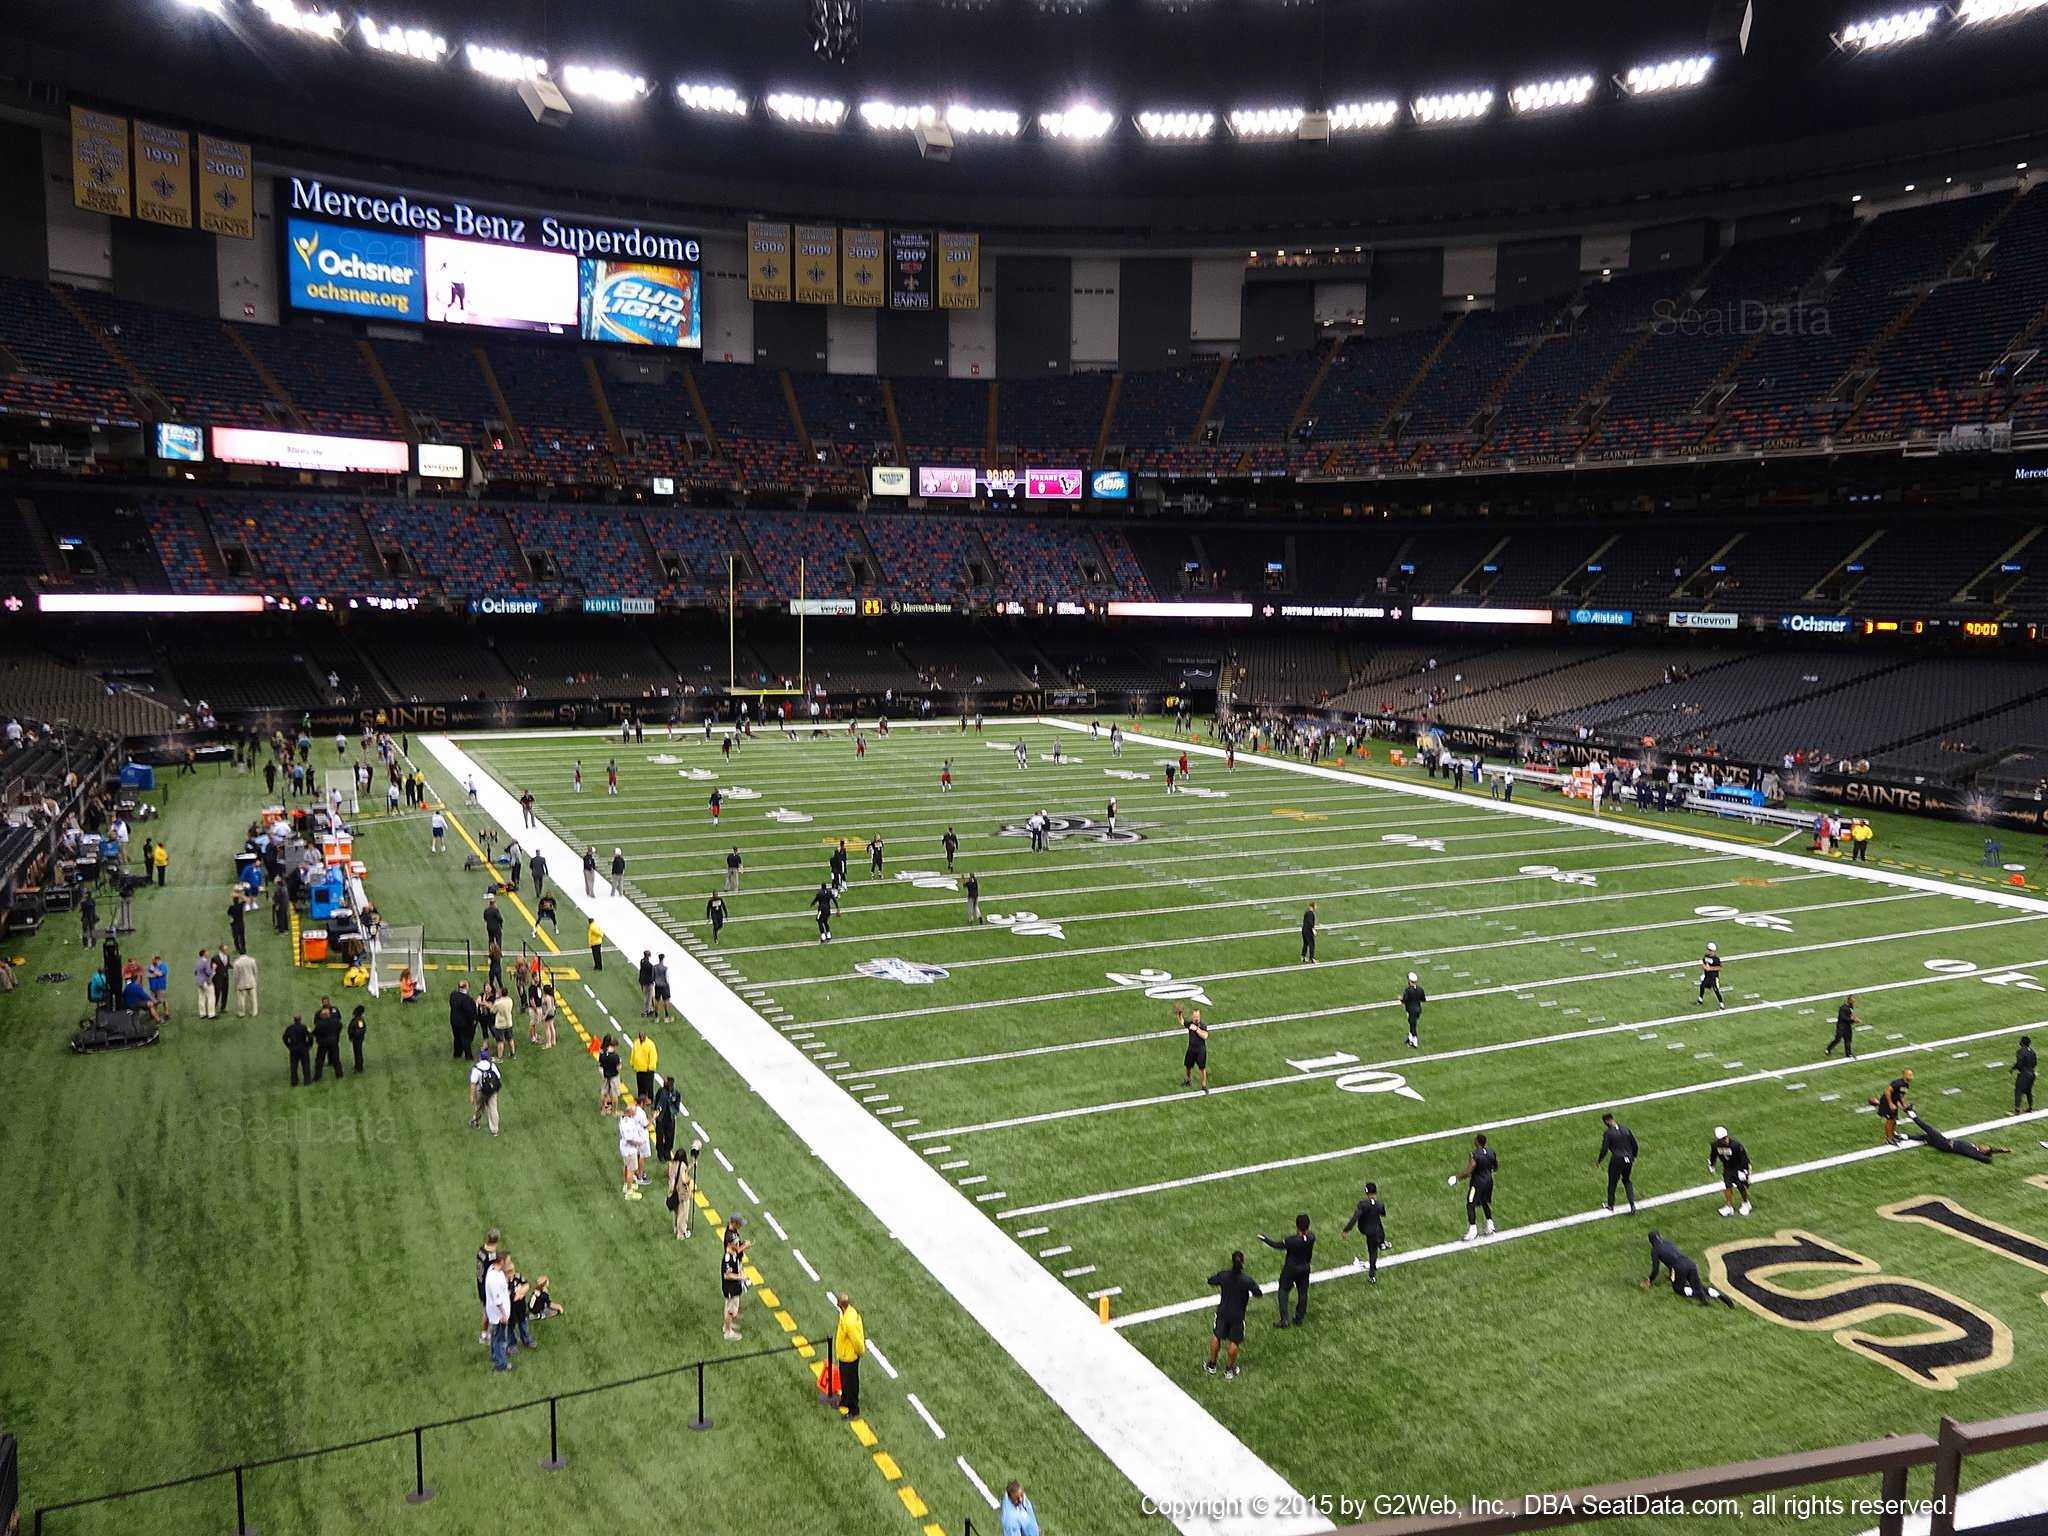 Seat view from section 249 at the Mercedes-Benz Superdome, home of the New Orleans Saints